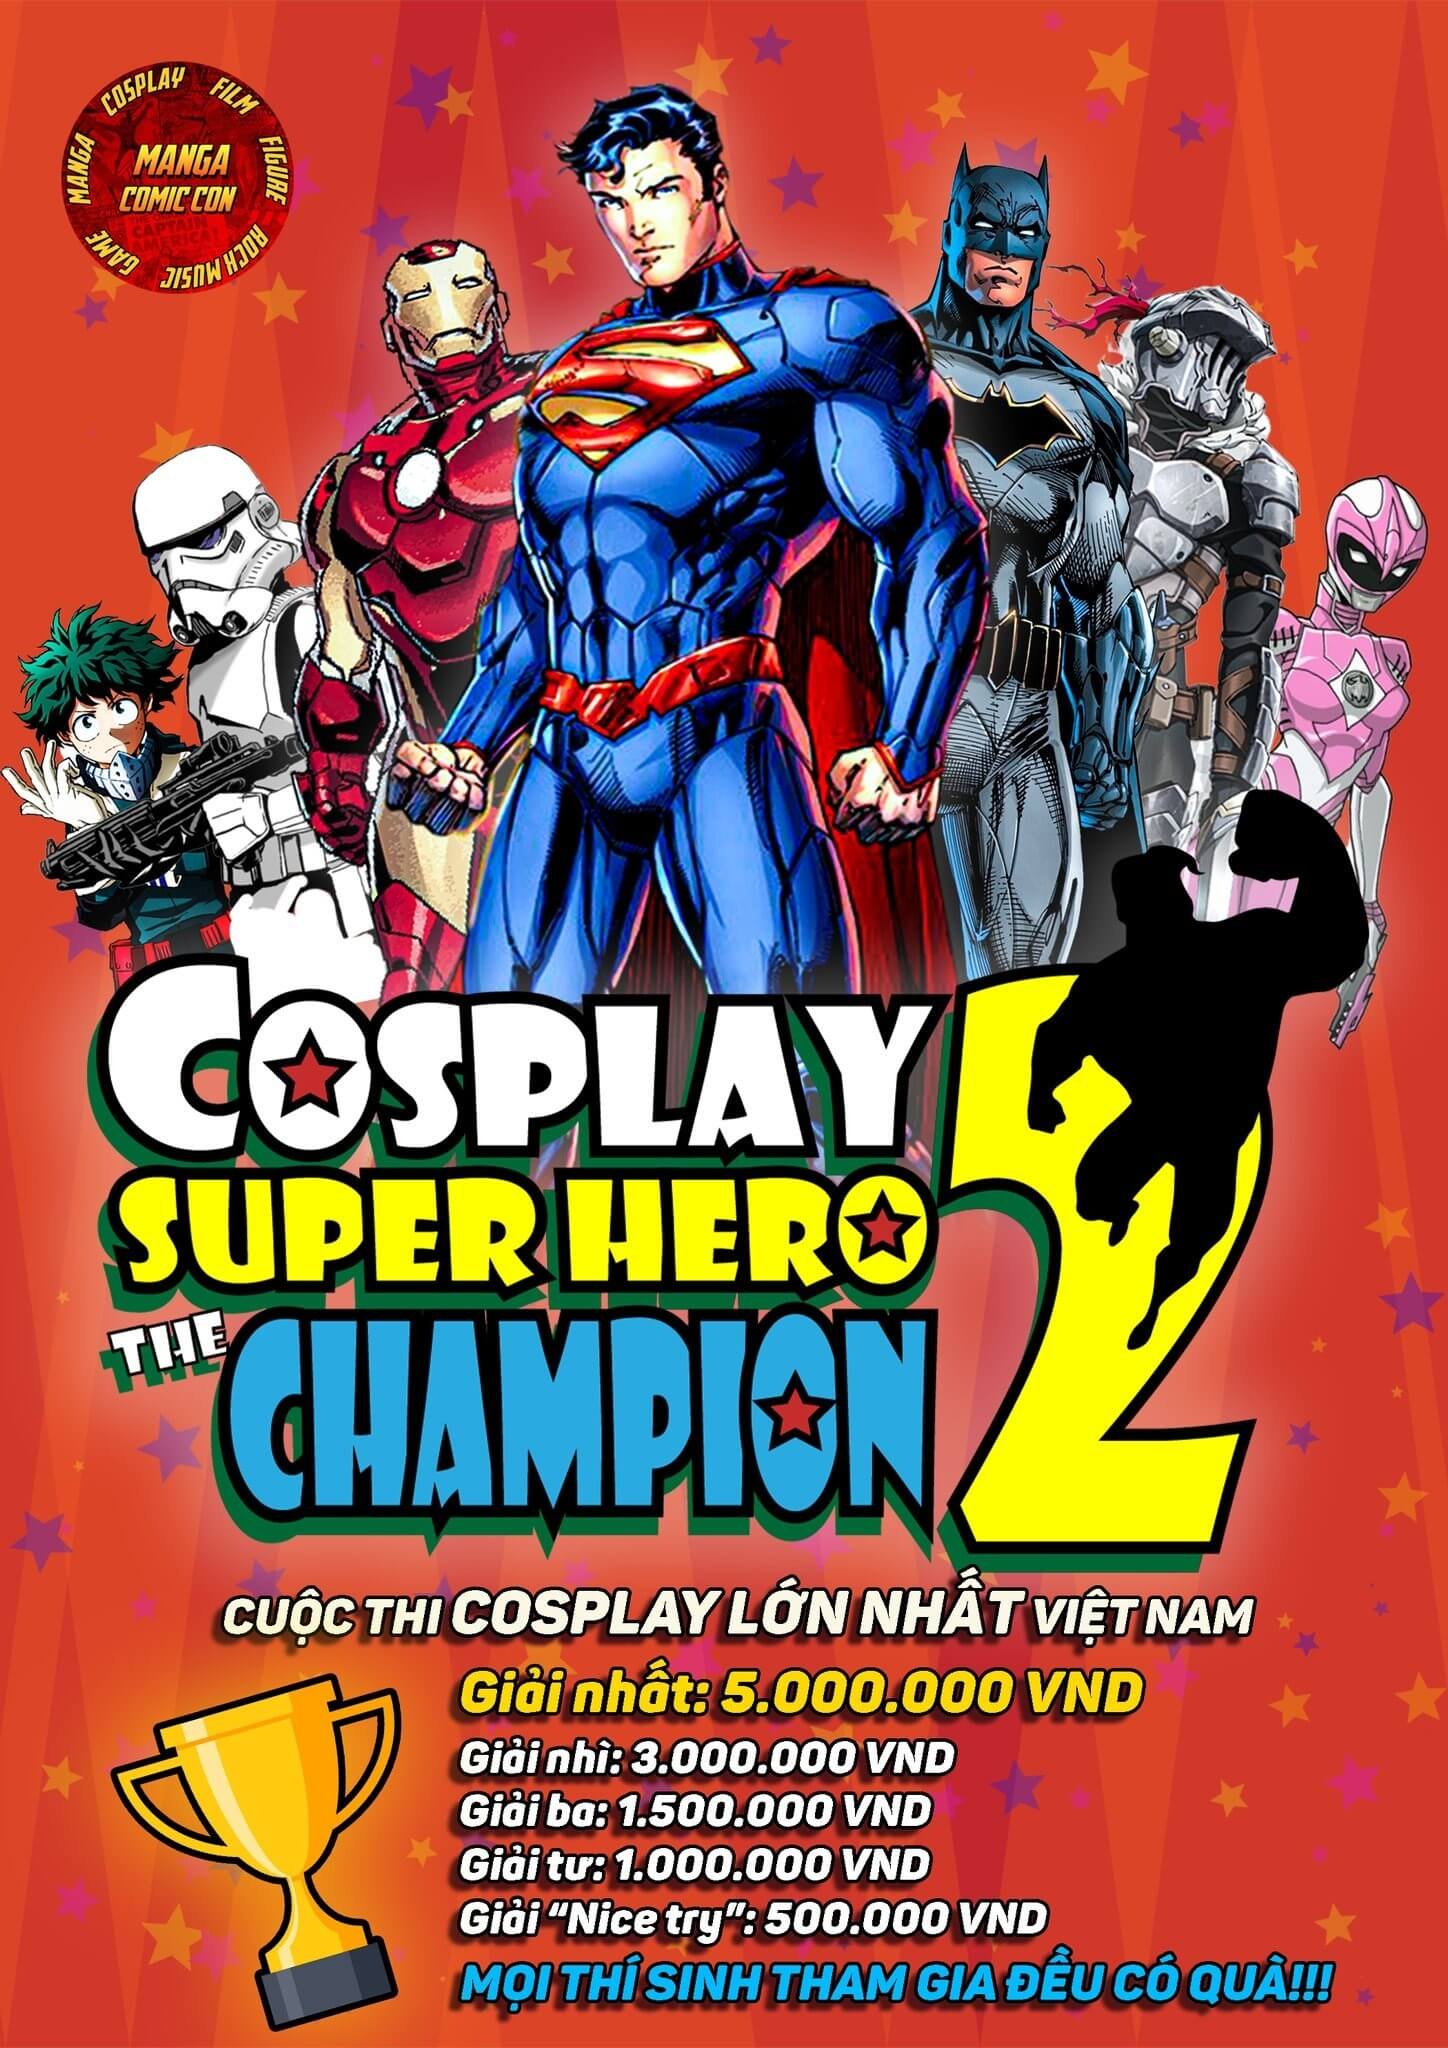 cuoc thi Cosplay Super Hero The Champion anh 2